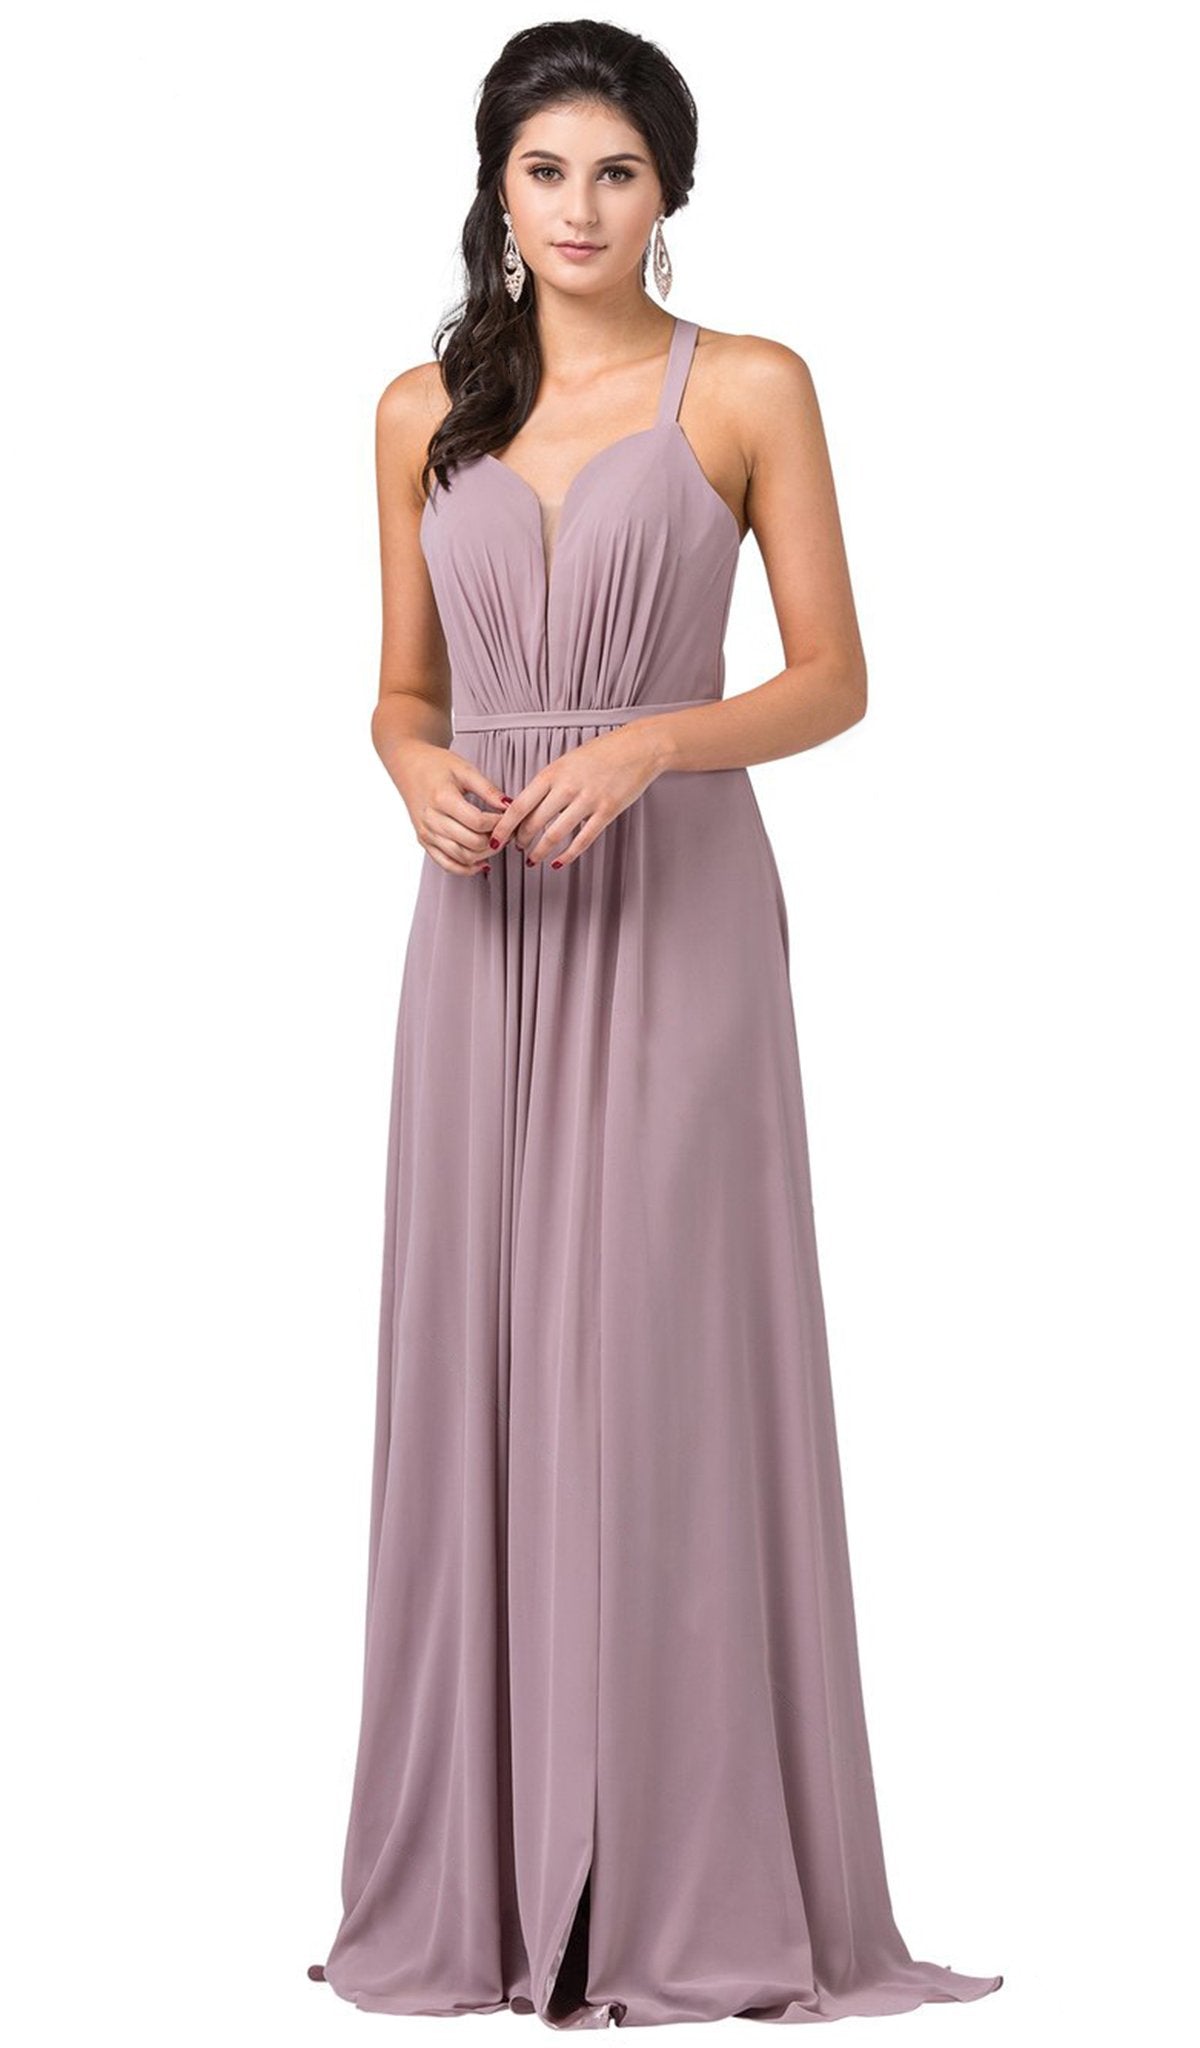 Dancing Queen - 2541 Crisscross Strap Ruched Bodice Chiffon Dress In Brown